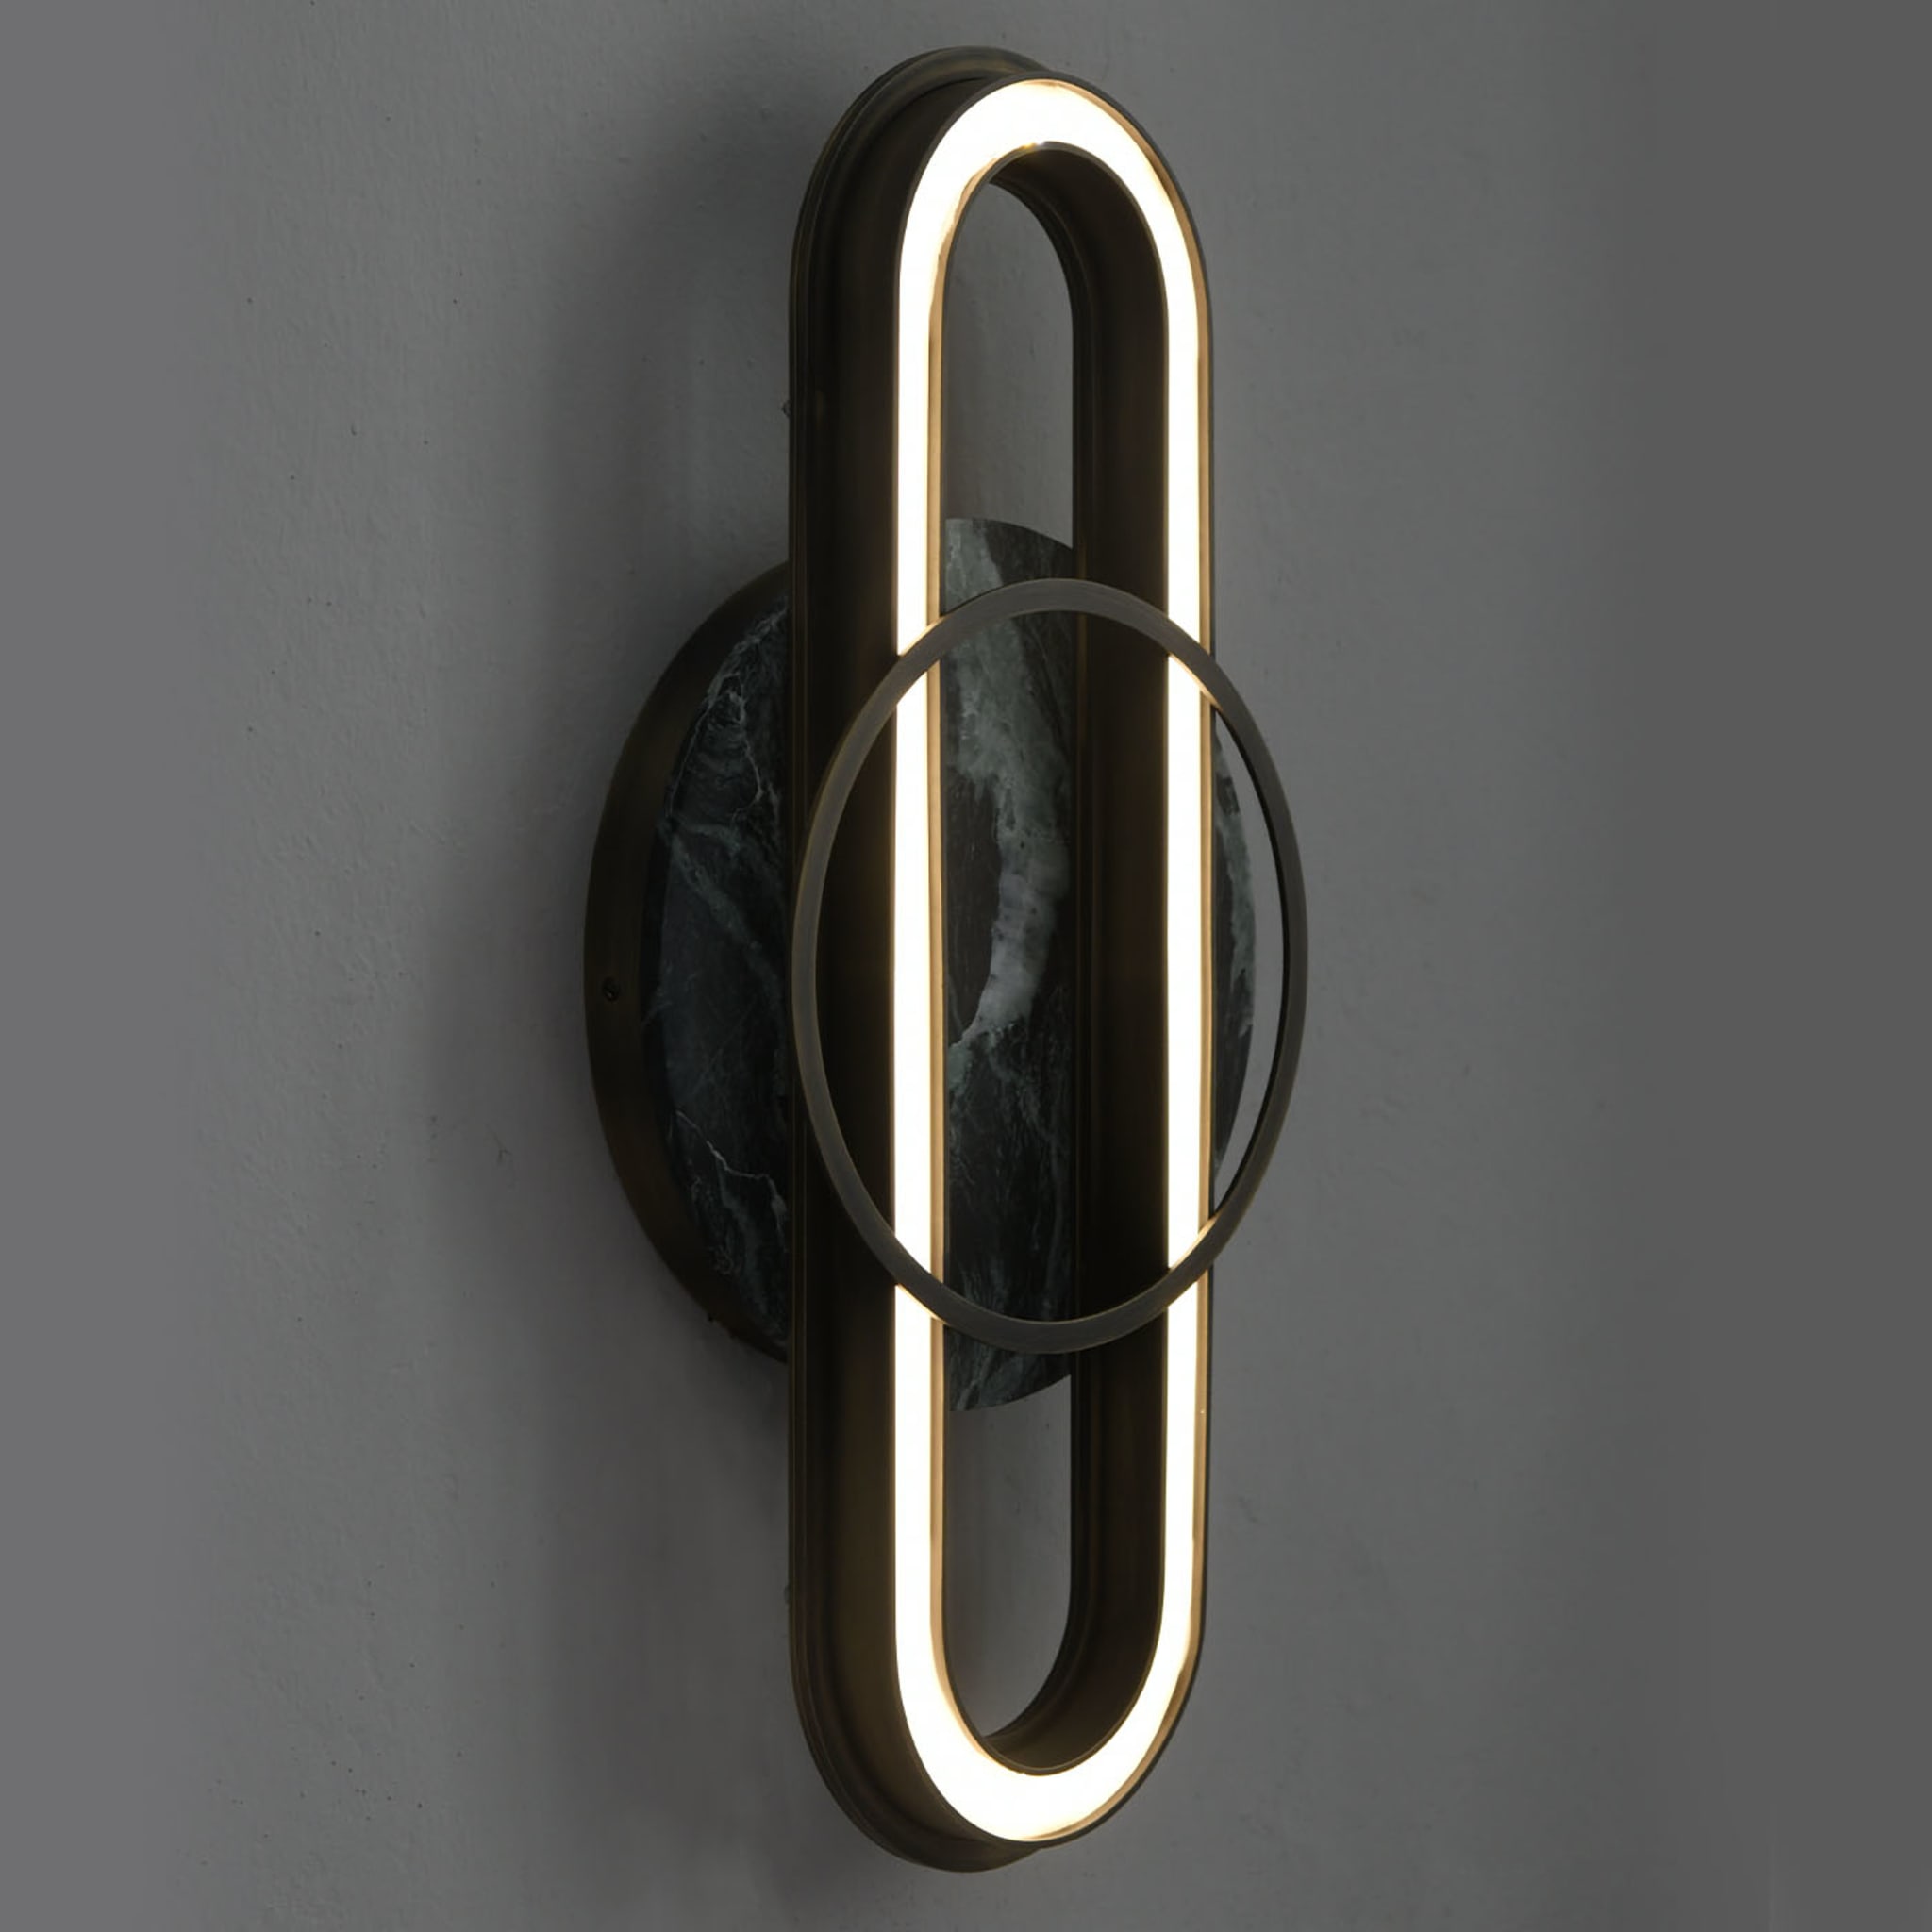 Loop Brass and Marble Wall Lamp - Alternative view 1